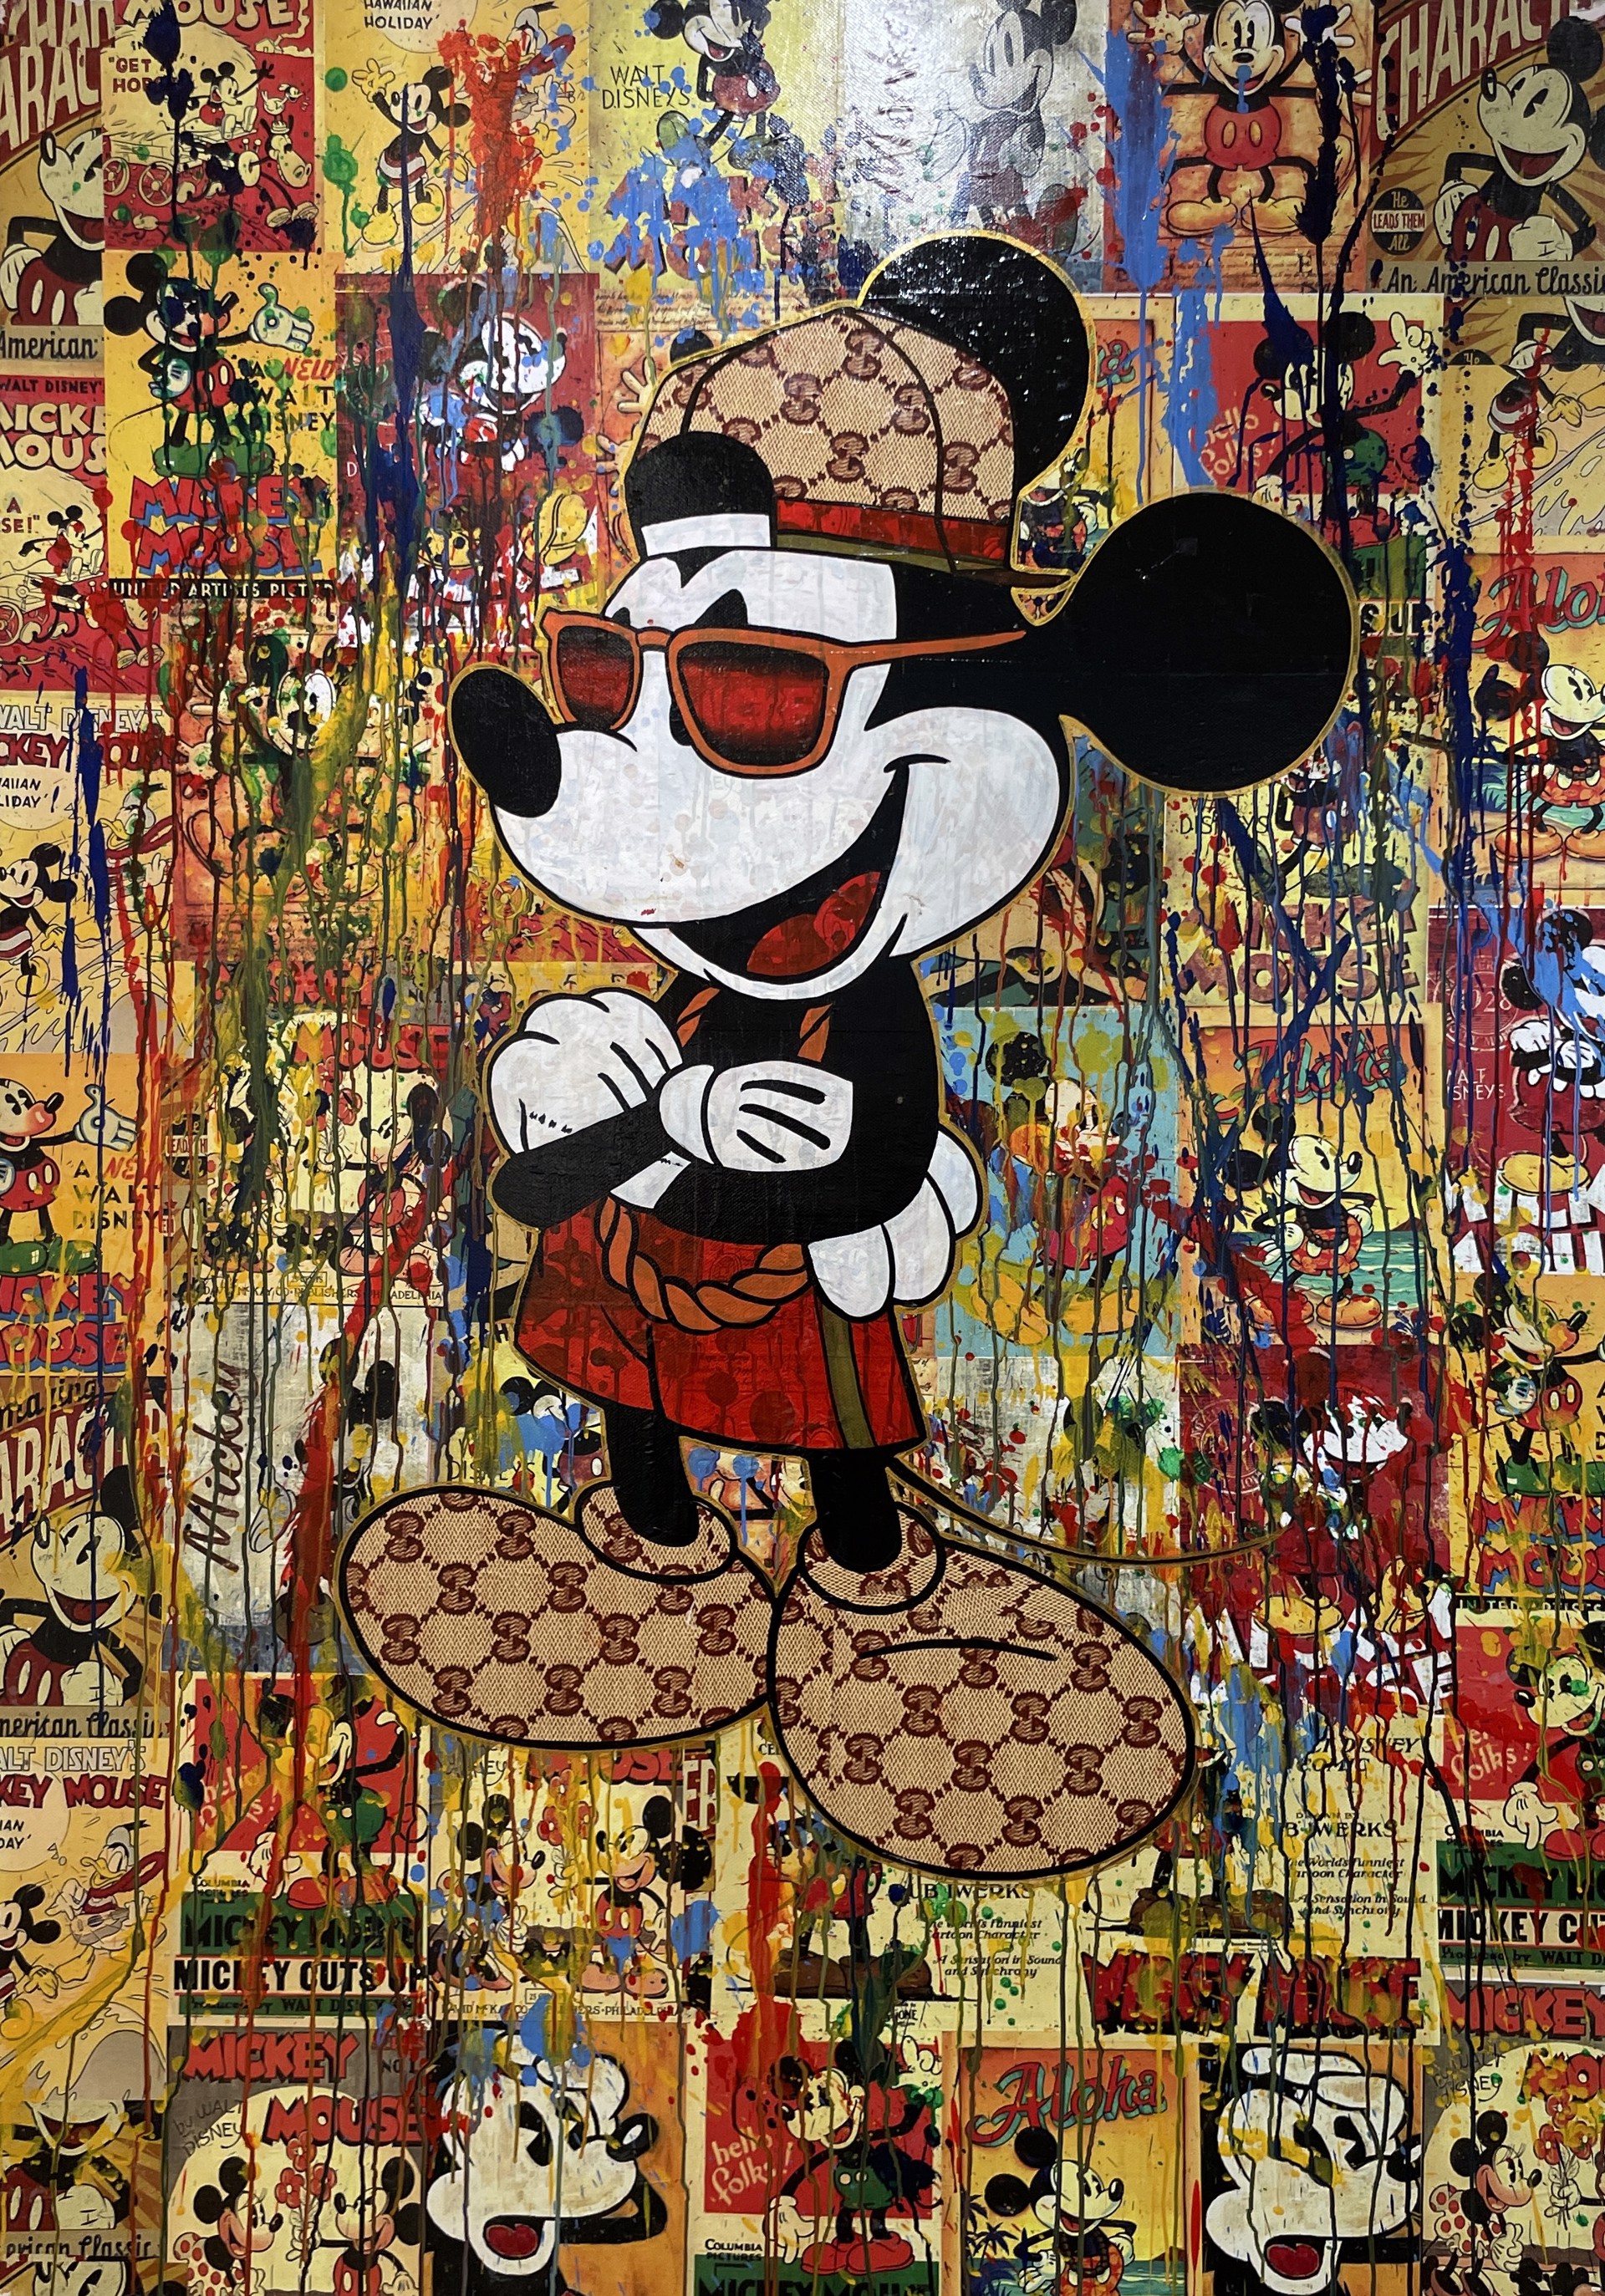 "Gucci Mickey-Mouse" by BuMa Project